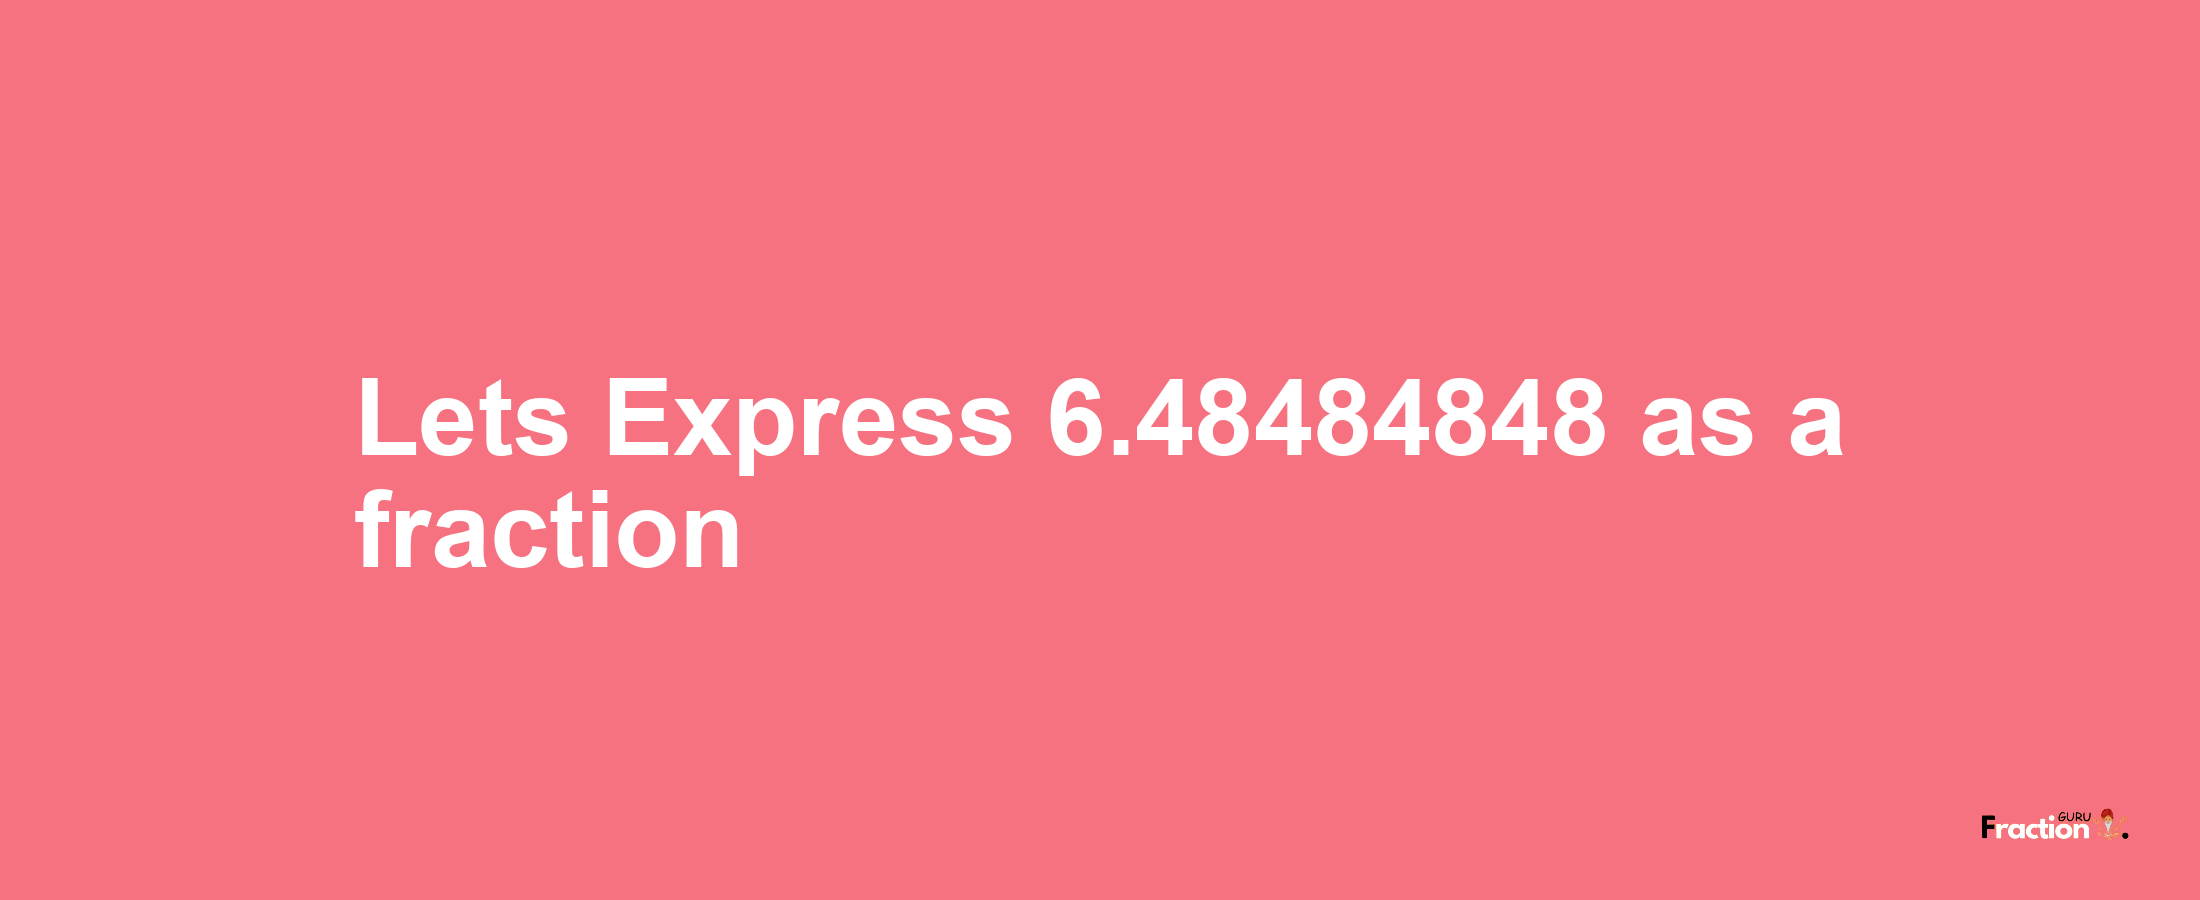 Lets Express 6.48484848 as afraction